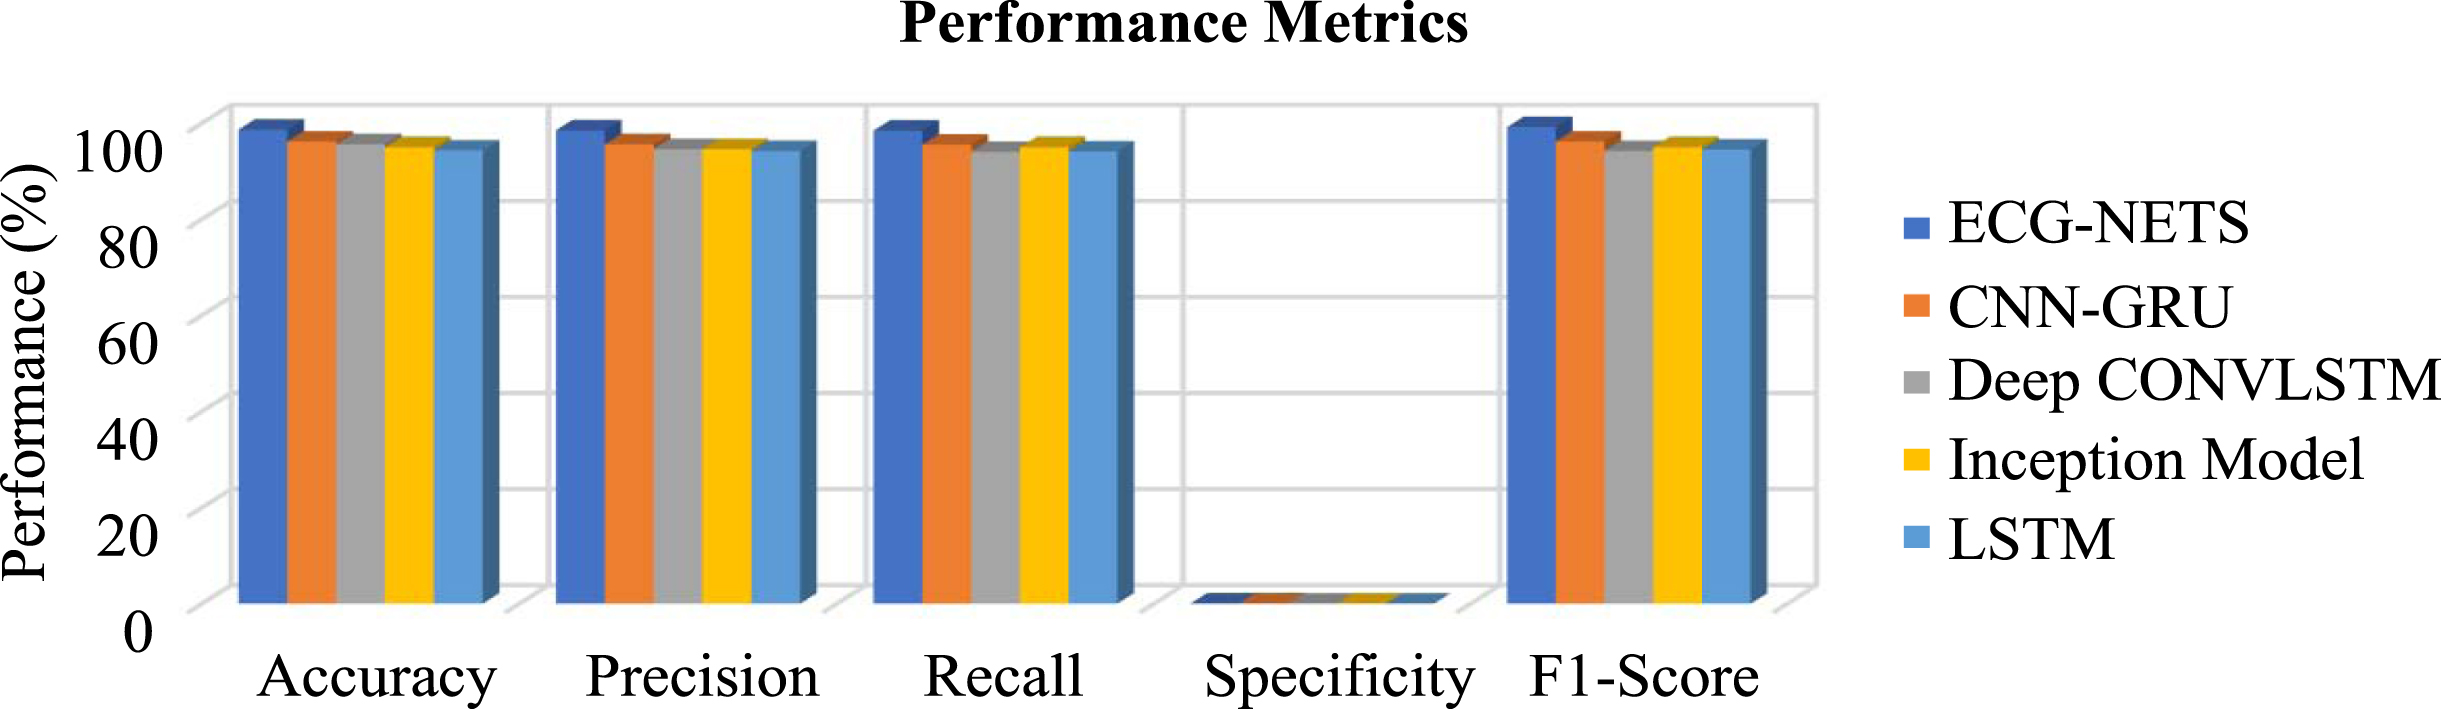 Performance metrics comparison for exiting methods in detecting hand related activities (real time datasets).